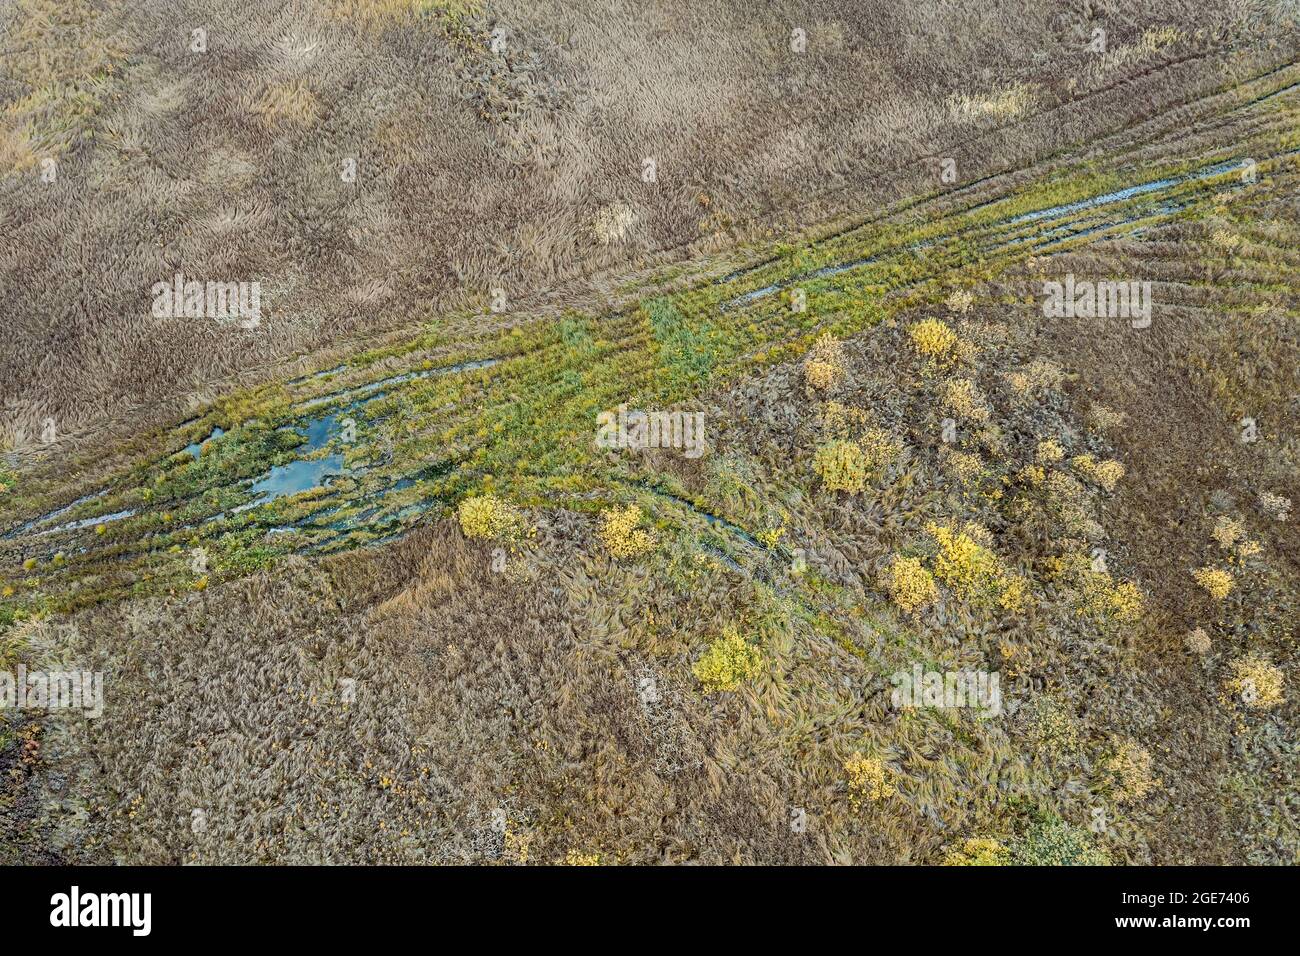 country road between swampy fields. wetland landscape. aerial view from flying drone Stock Photo